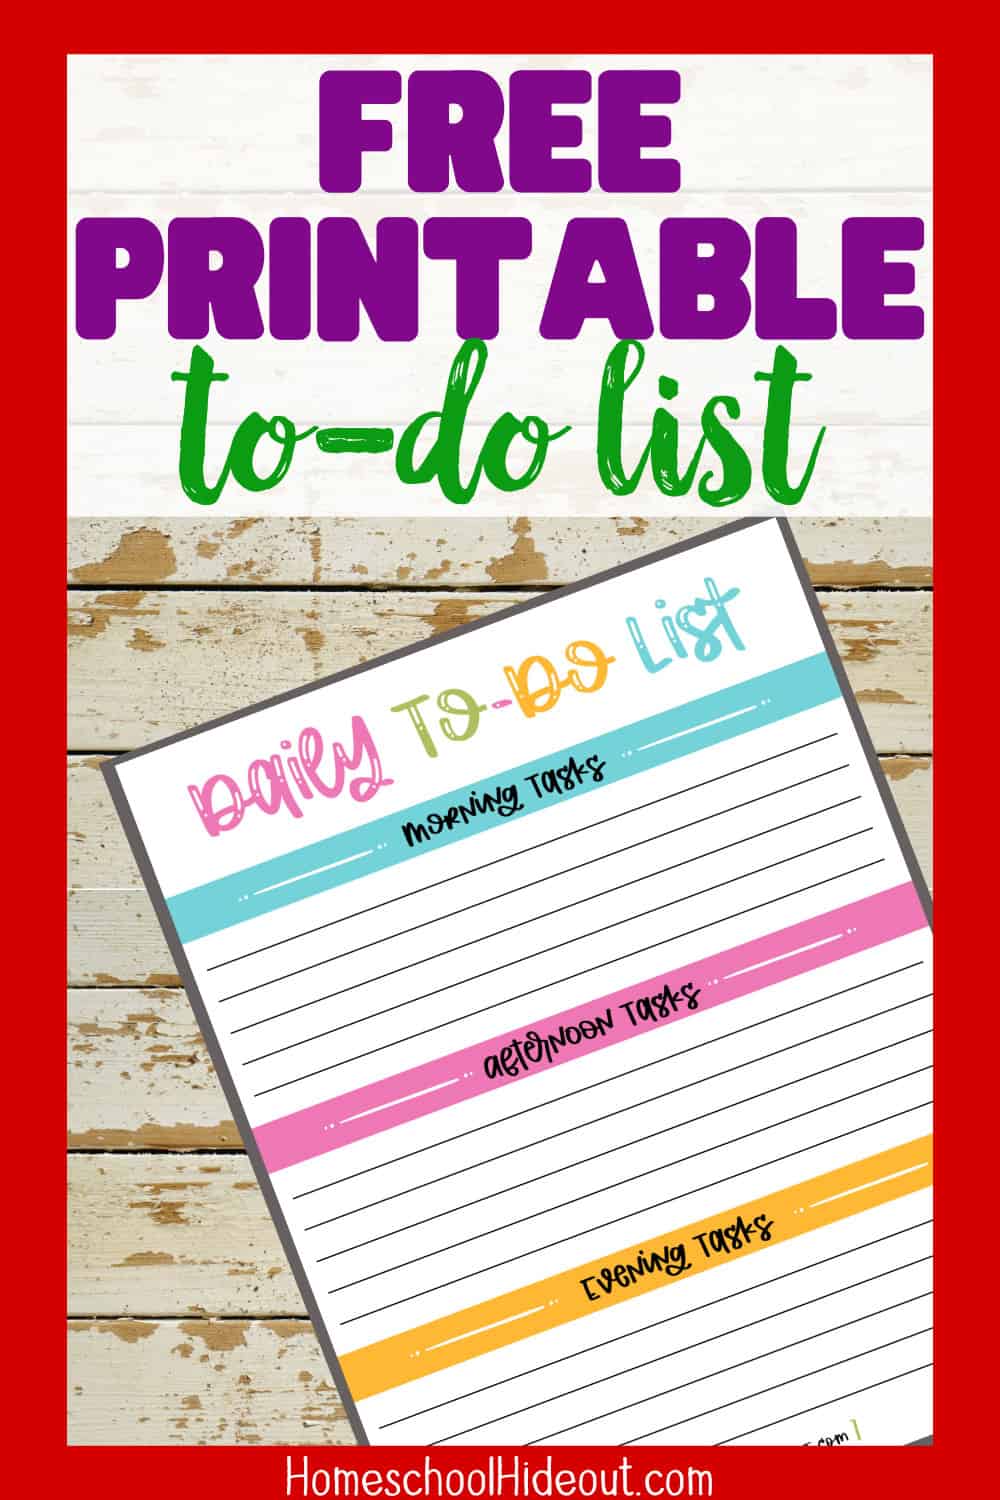 This printable daily to-do list has made homeschooling so much easier! I use it for my business and my kids use it for chores and school! Perfect for the whole family and best of all, it's FREE!